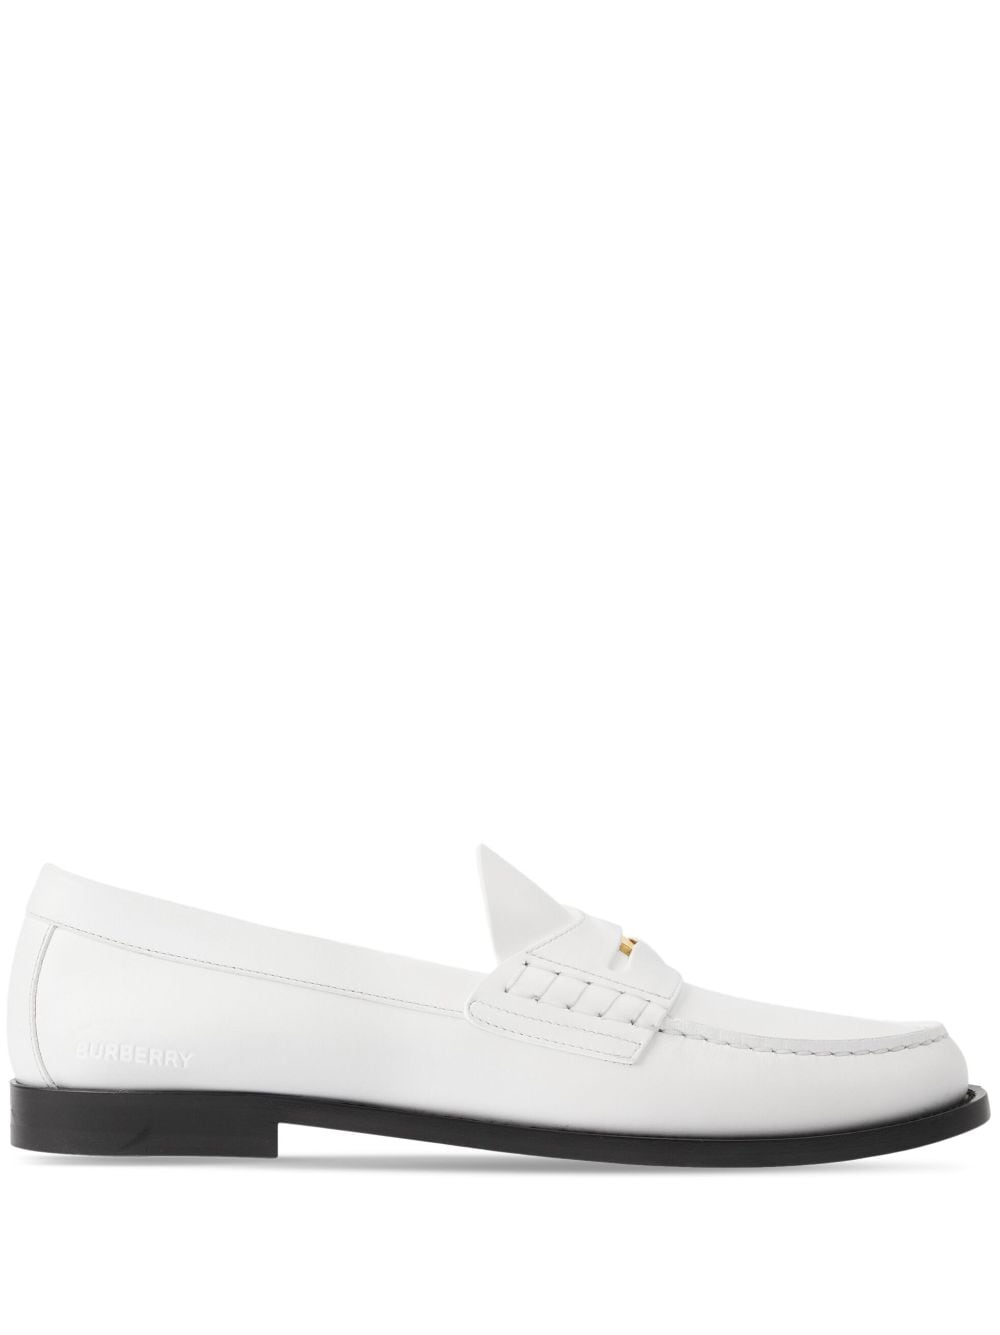 Burberry logo-detail leather penny loafers - White von Burberry